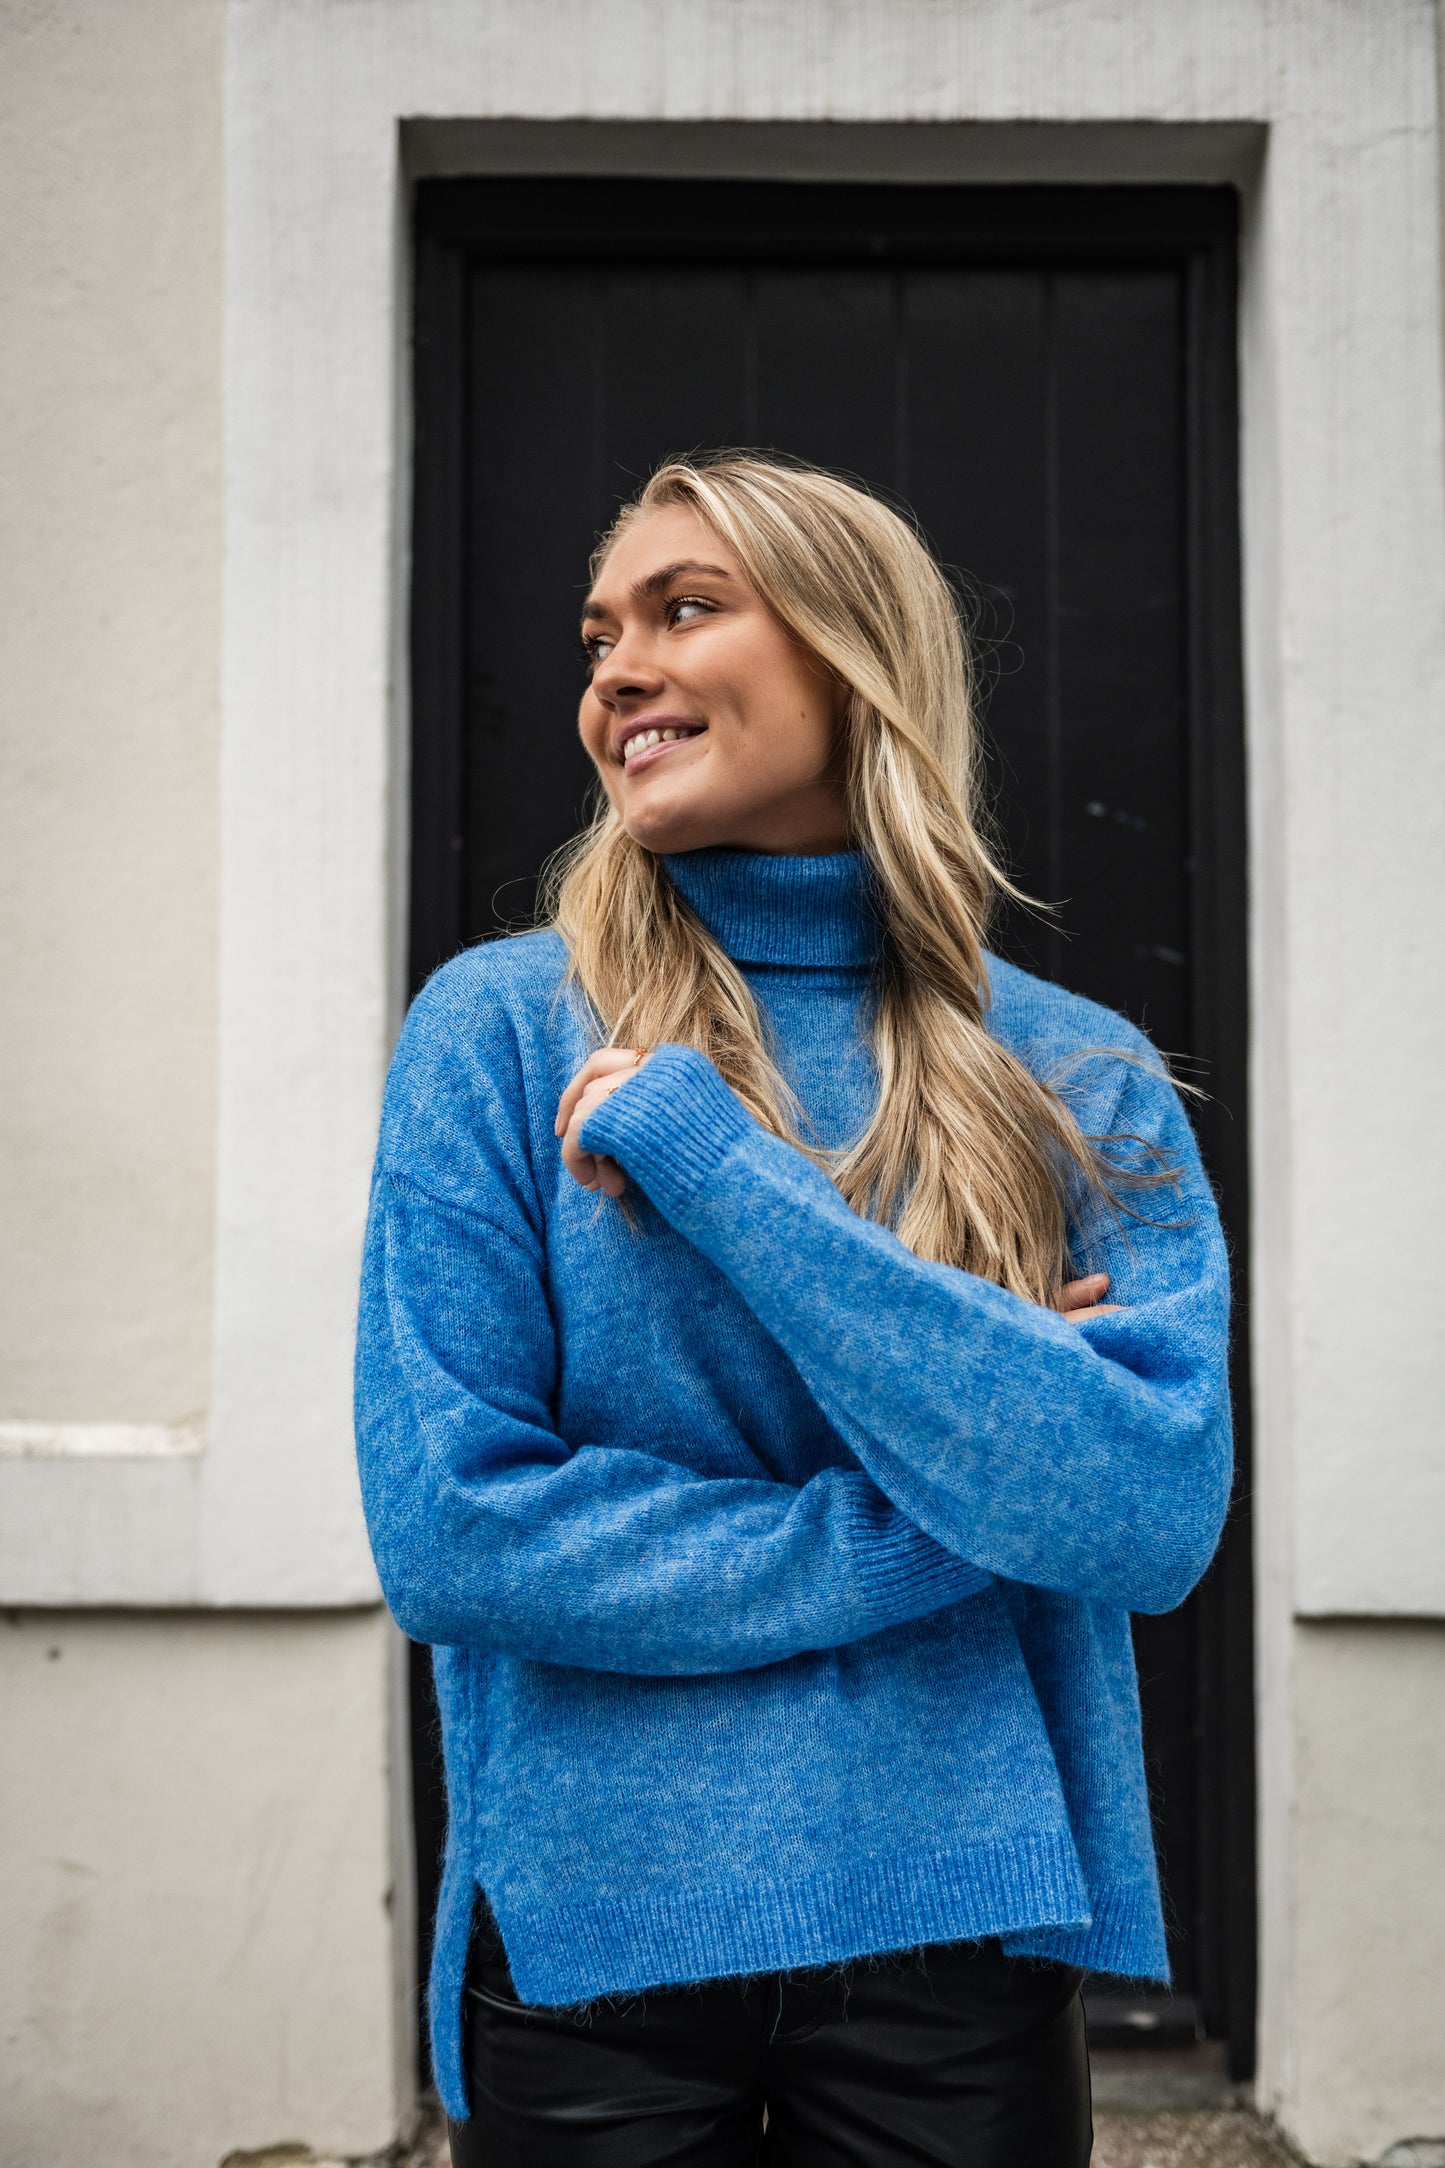 PCNEYA Pullover - French Blue